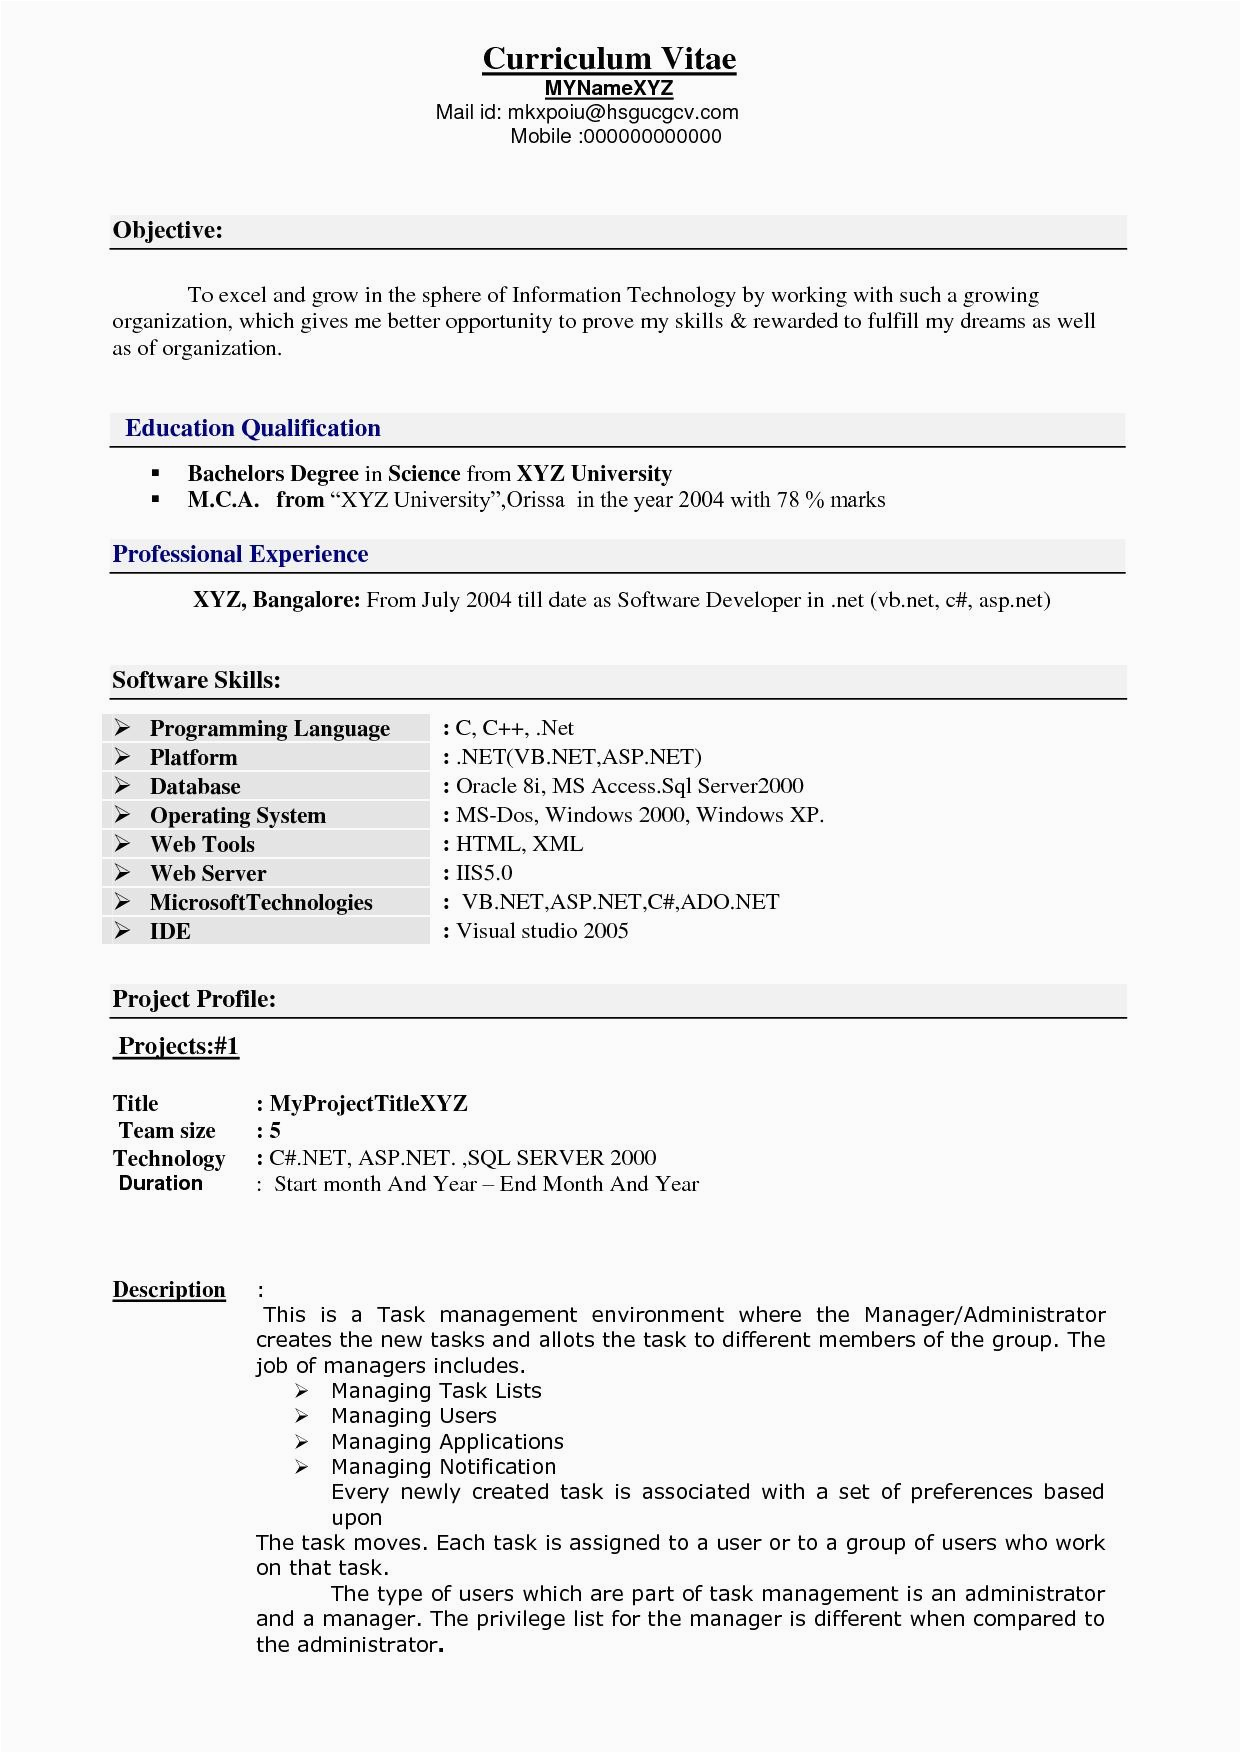 Sample Resume for 1 Year Experienced software Developer Resume format 1 Year Experienced software Engineer